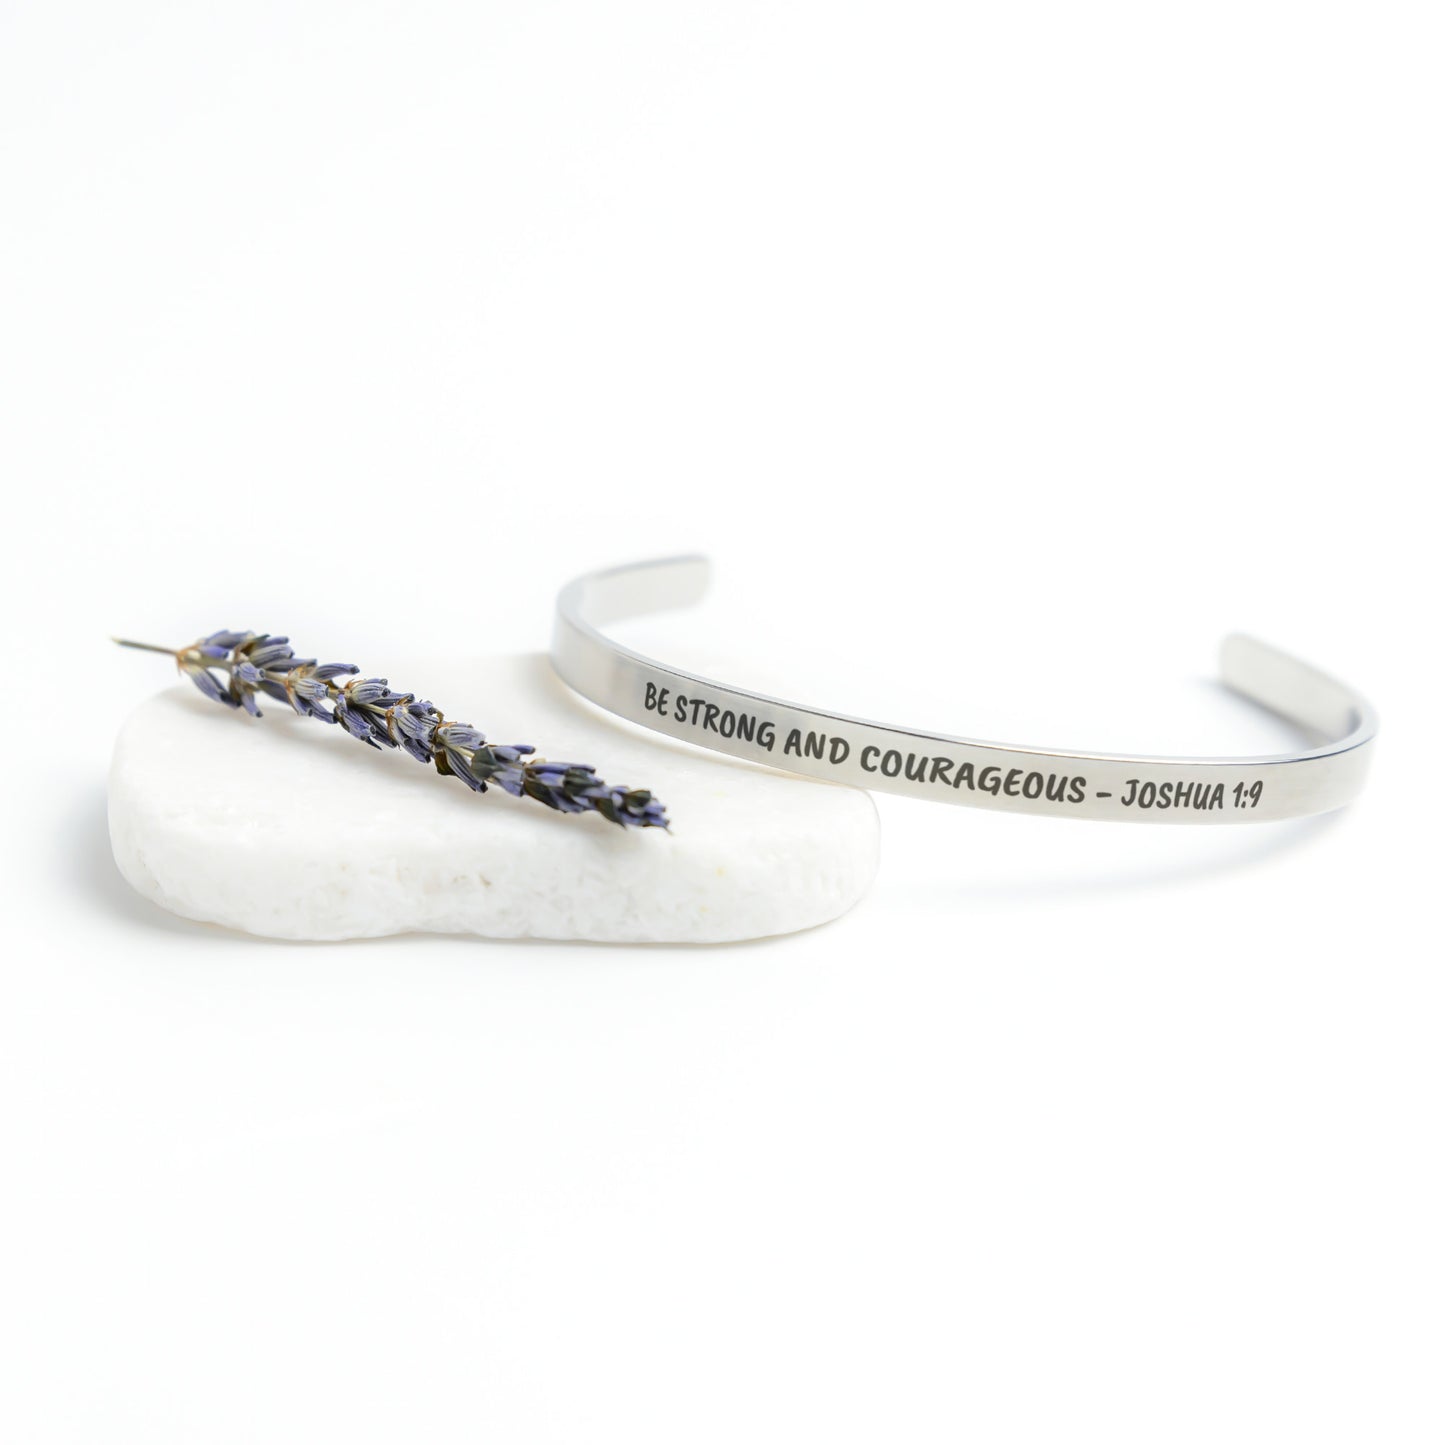 Be Strong And Courageous - Joshua 1:9 Cuff Bracelet